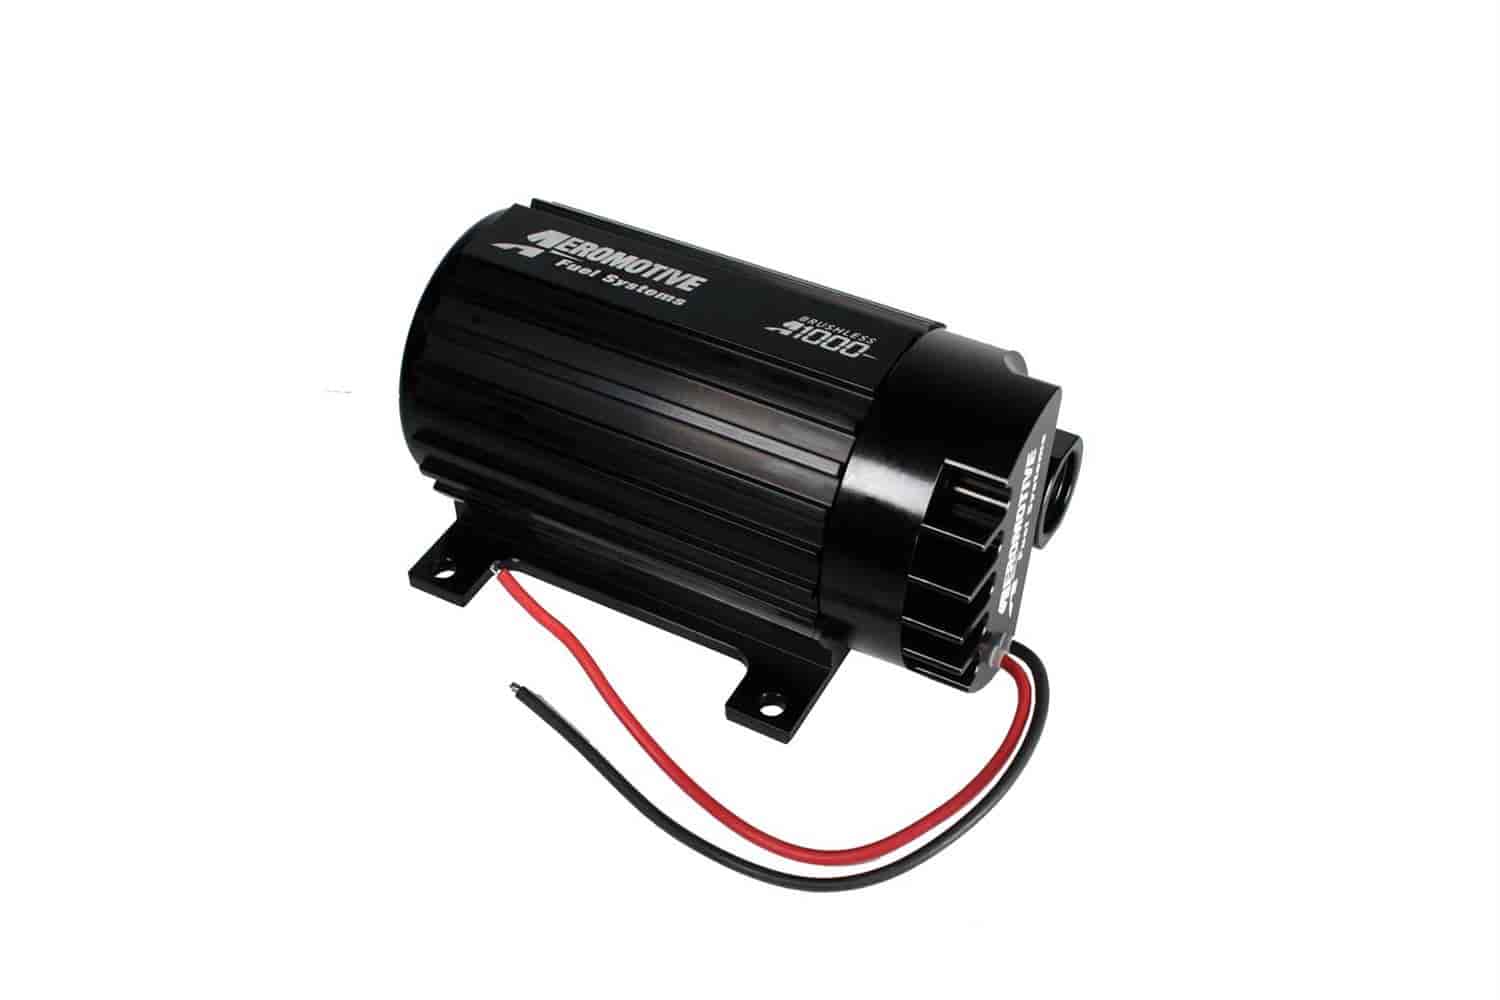 A1000 External Variable Speed Fuel Pump Signature Housing, Brushless Motor